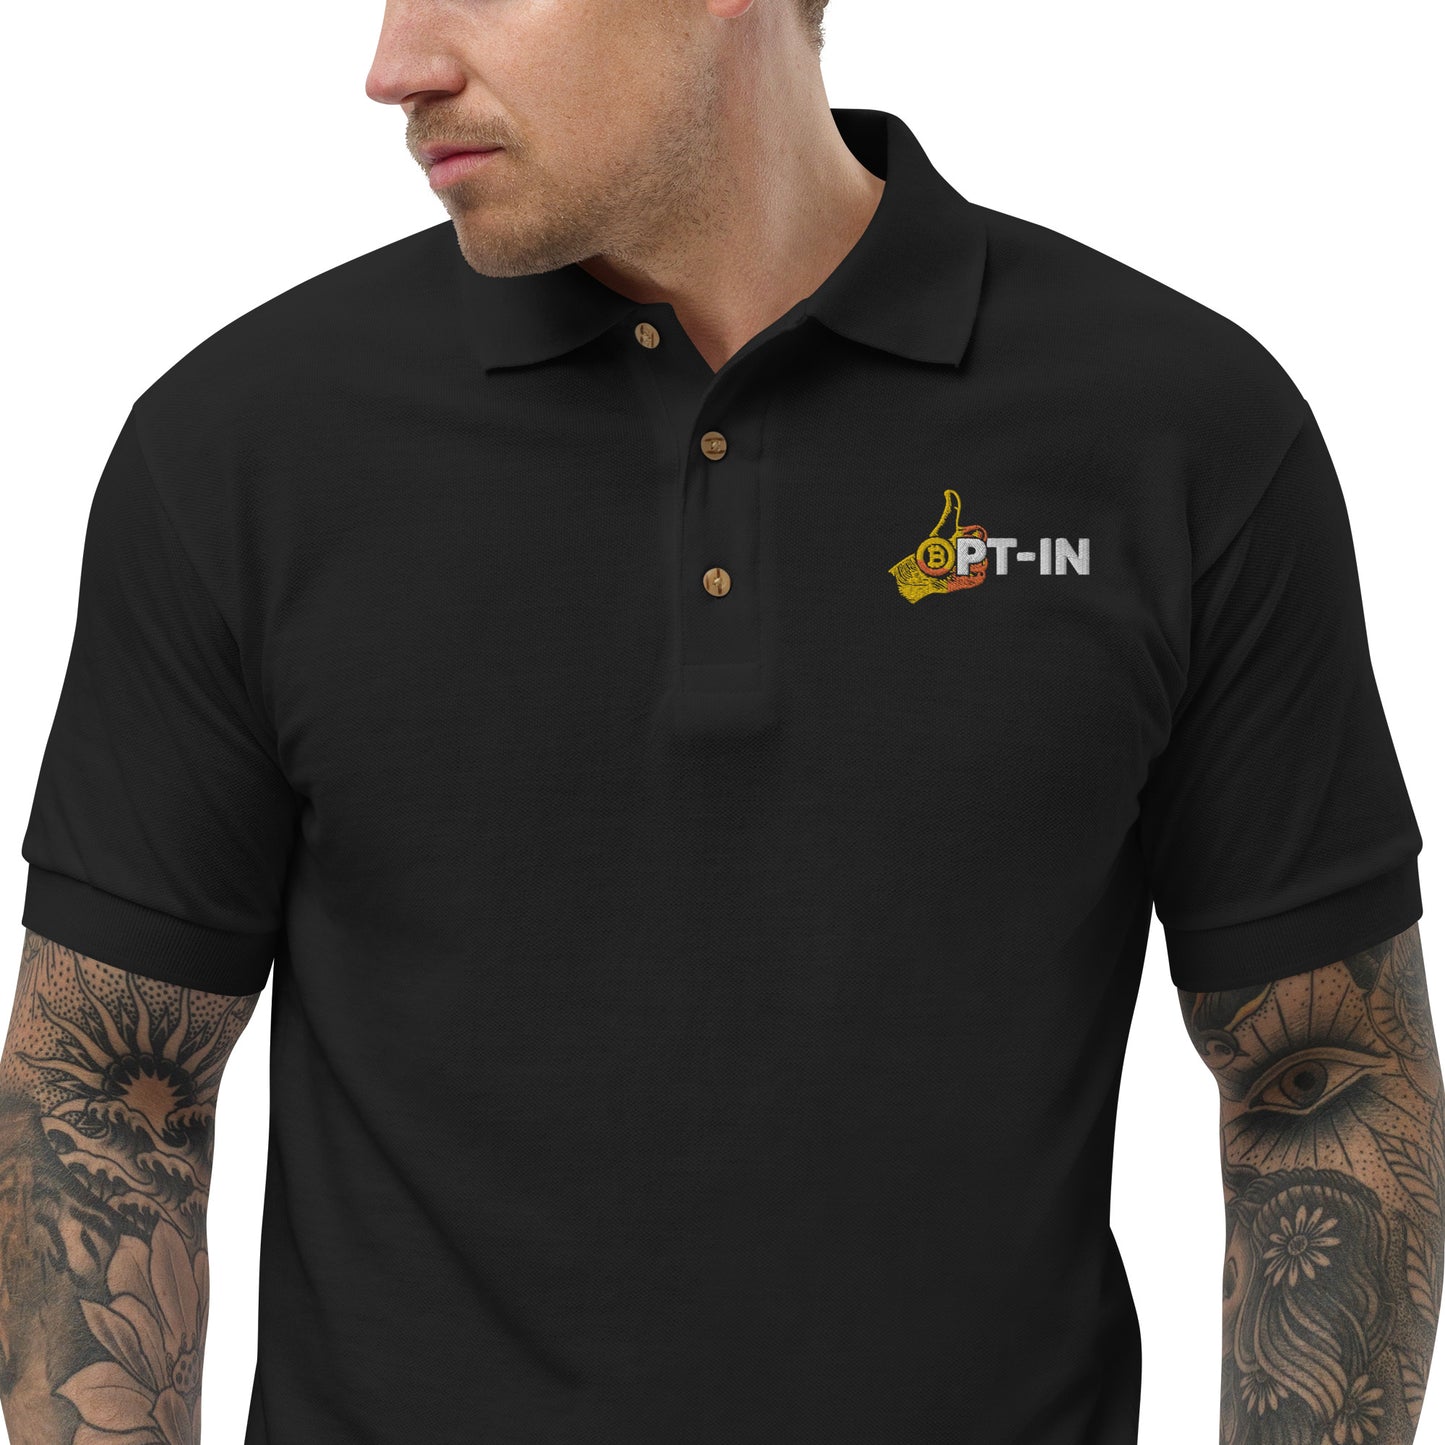 Opt-In Embroidered Polo Shirt